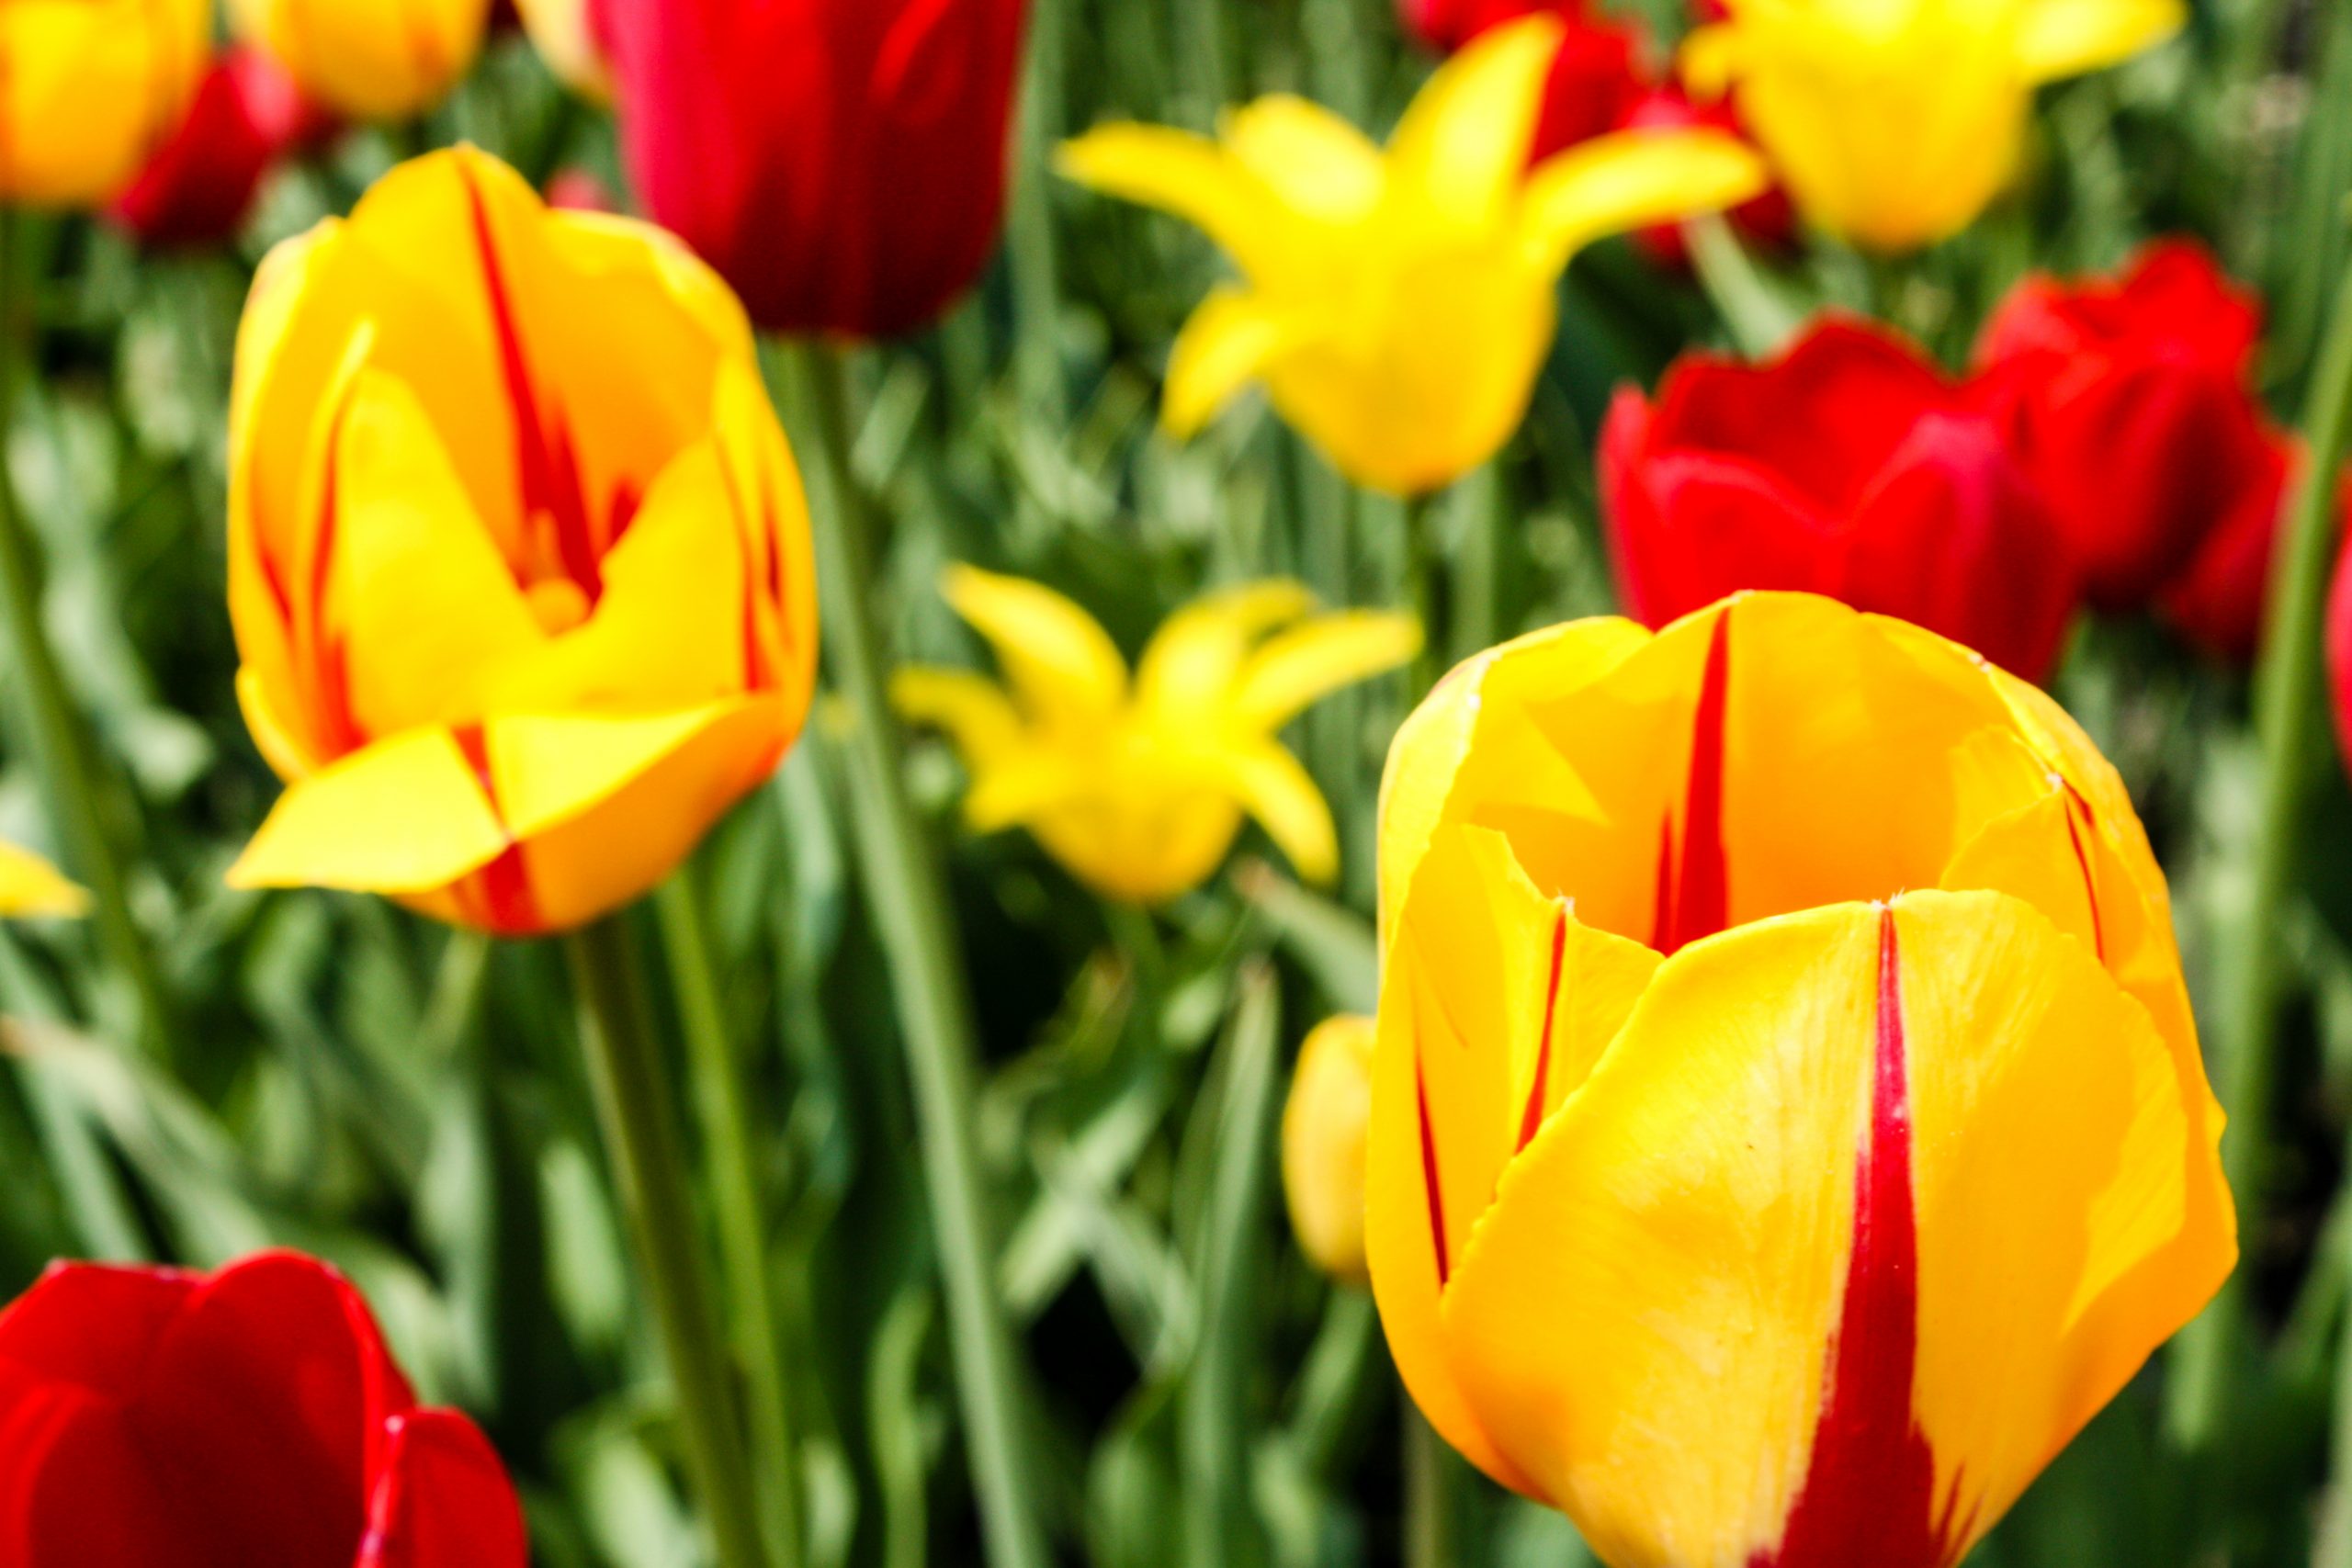 Tulip Time Festival Guide How to See Tulips in Holland, Michigan